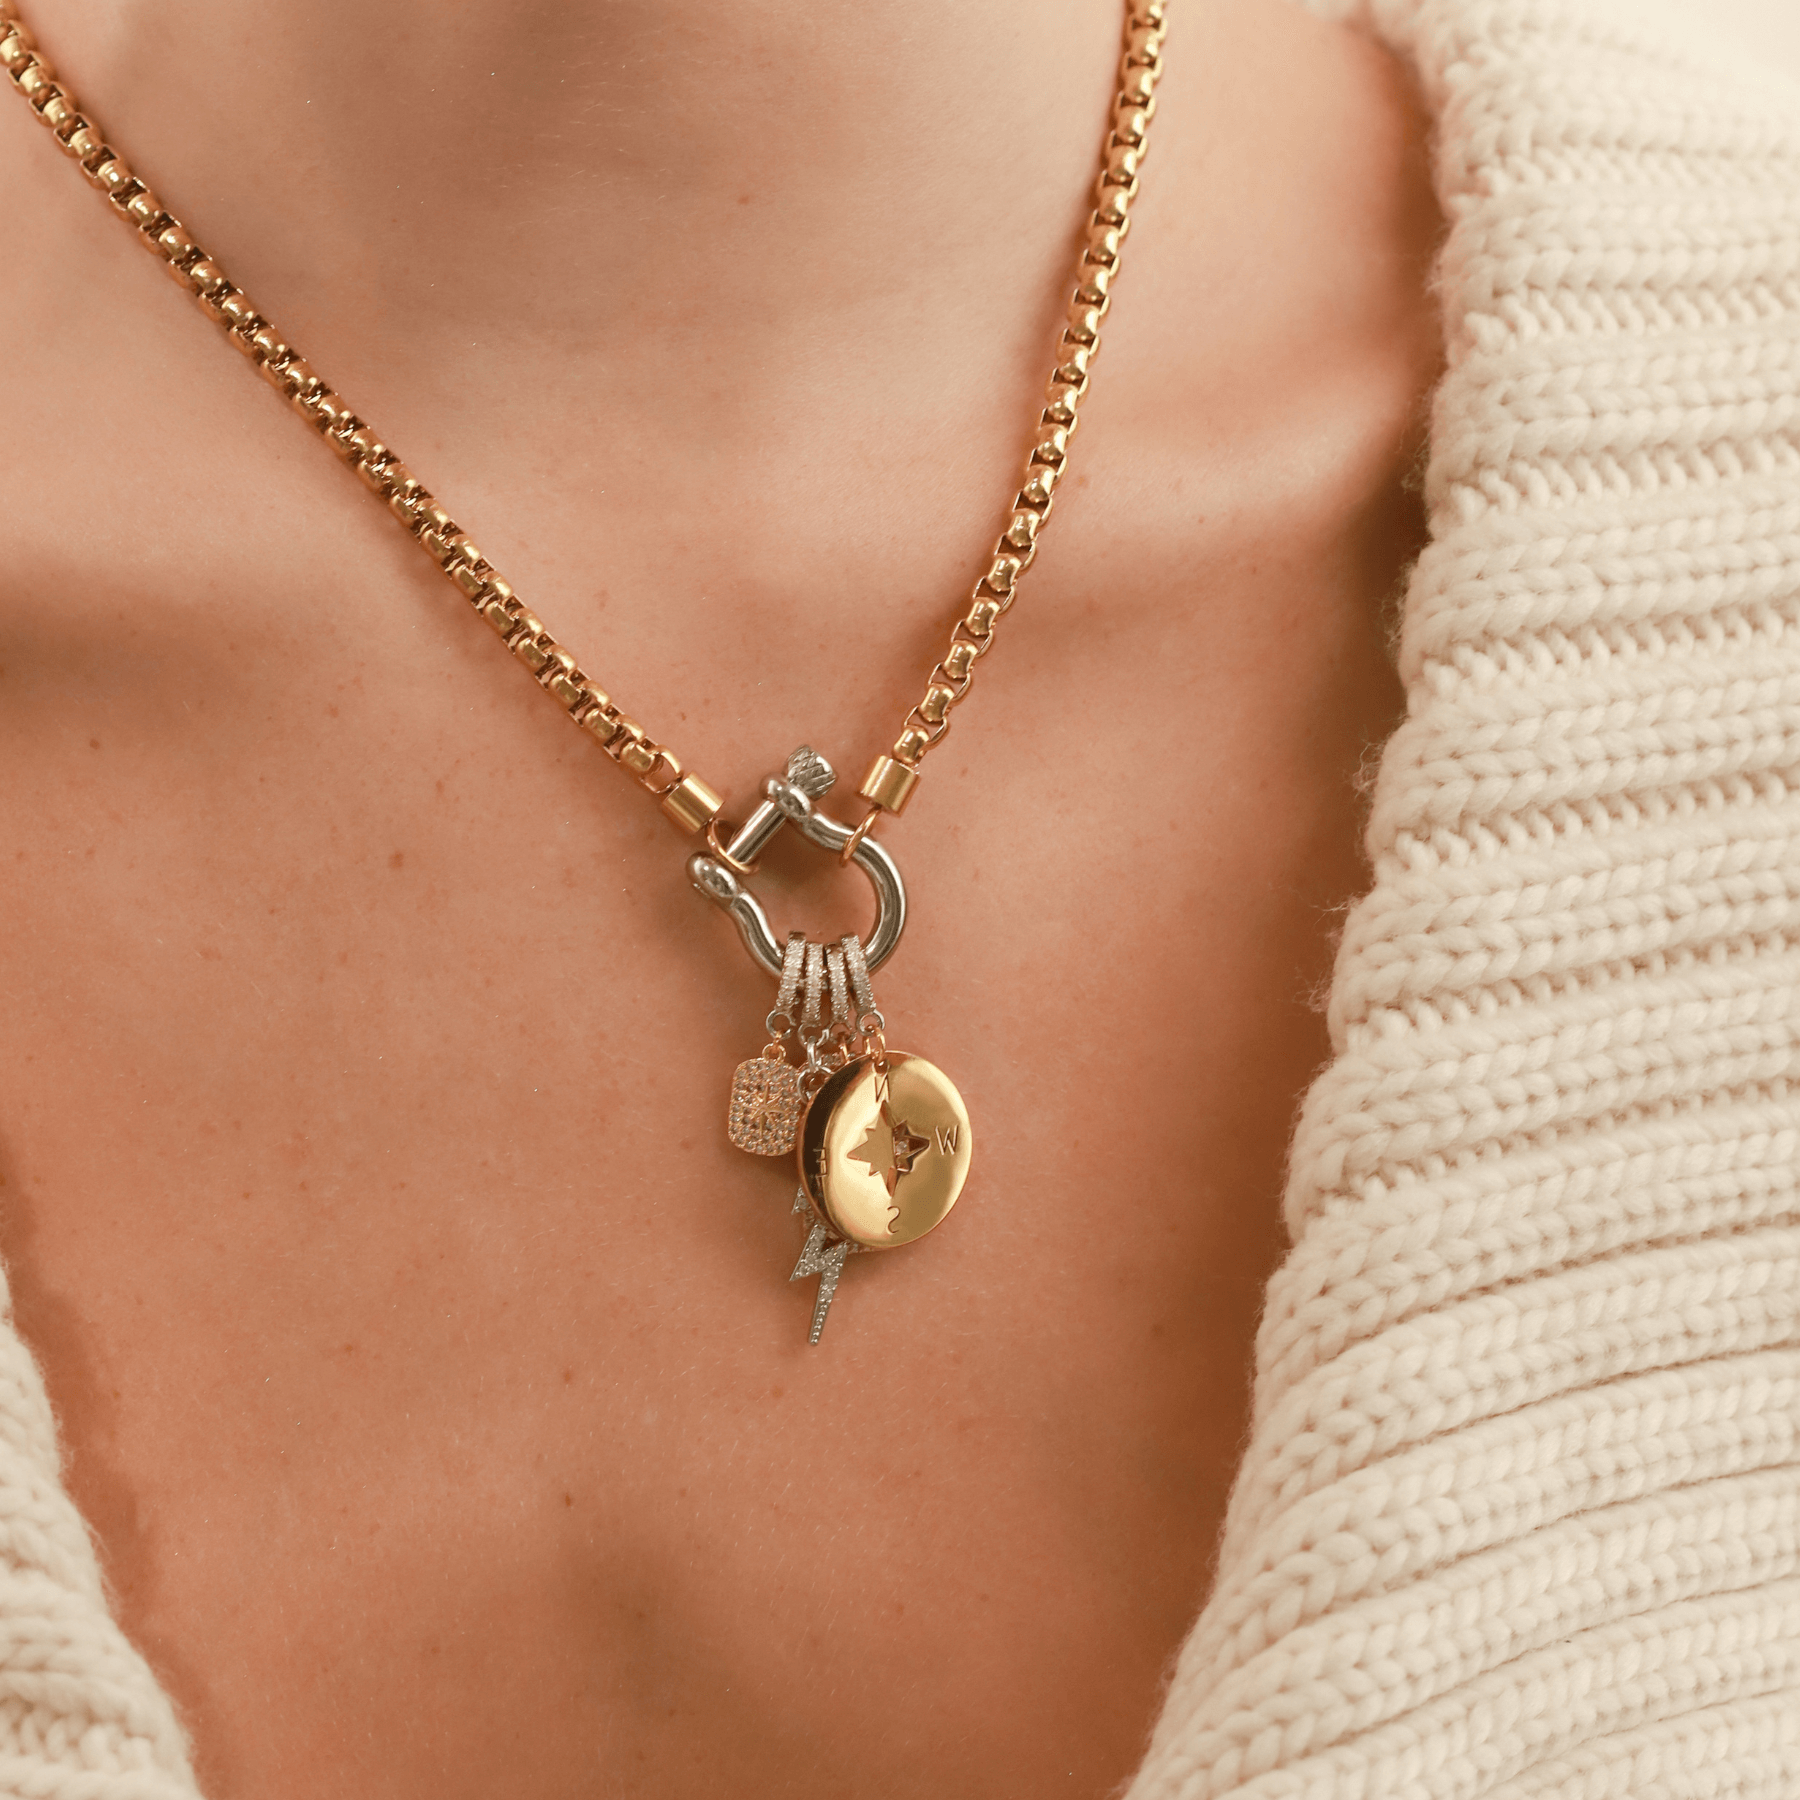 Engraved Charm Necklace